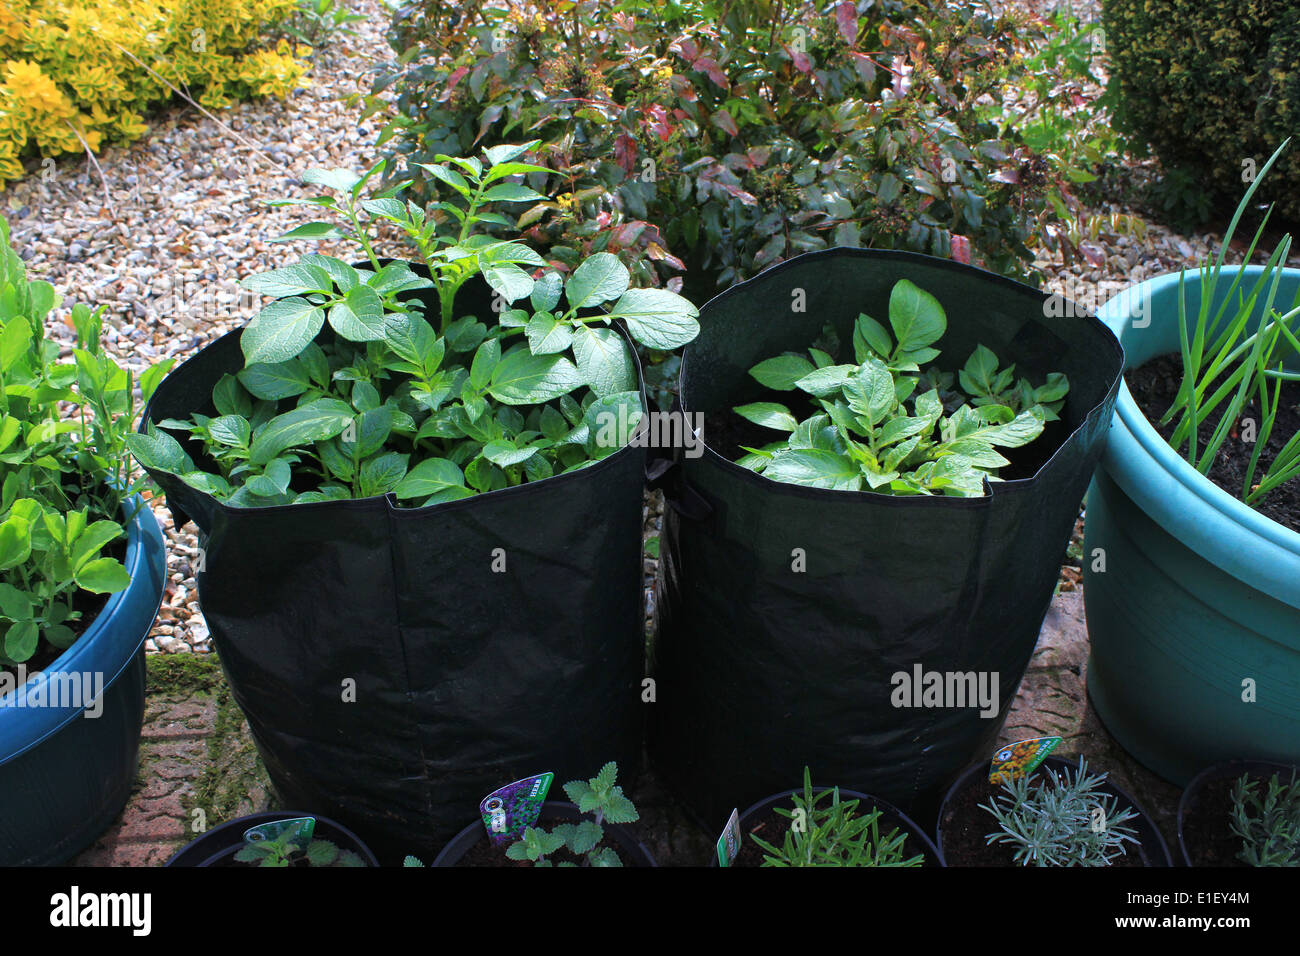 How To Grow Potatoes in a Bag